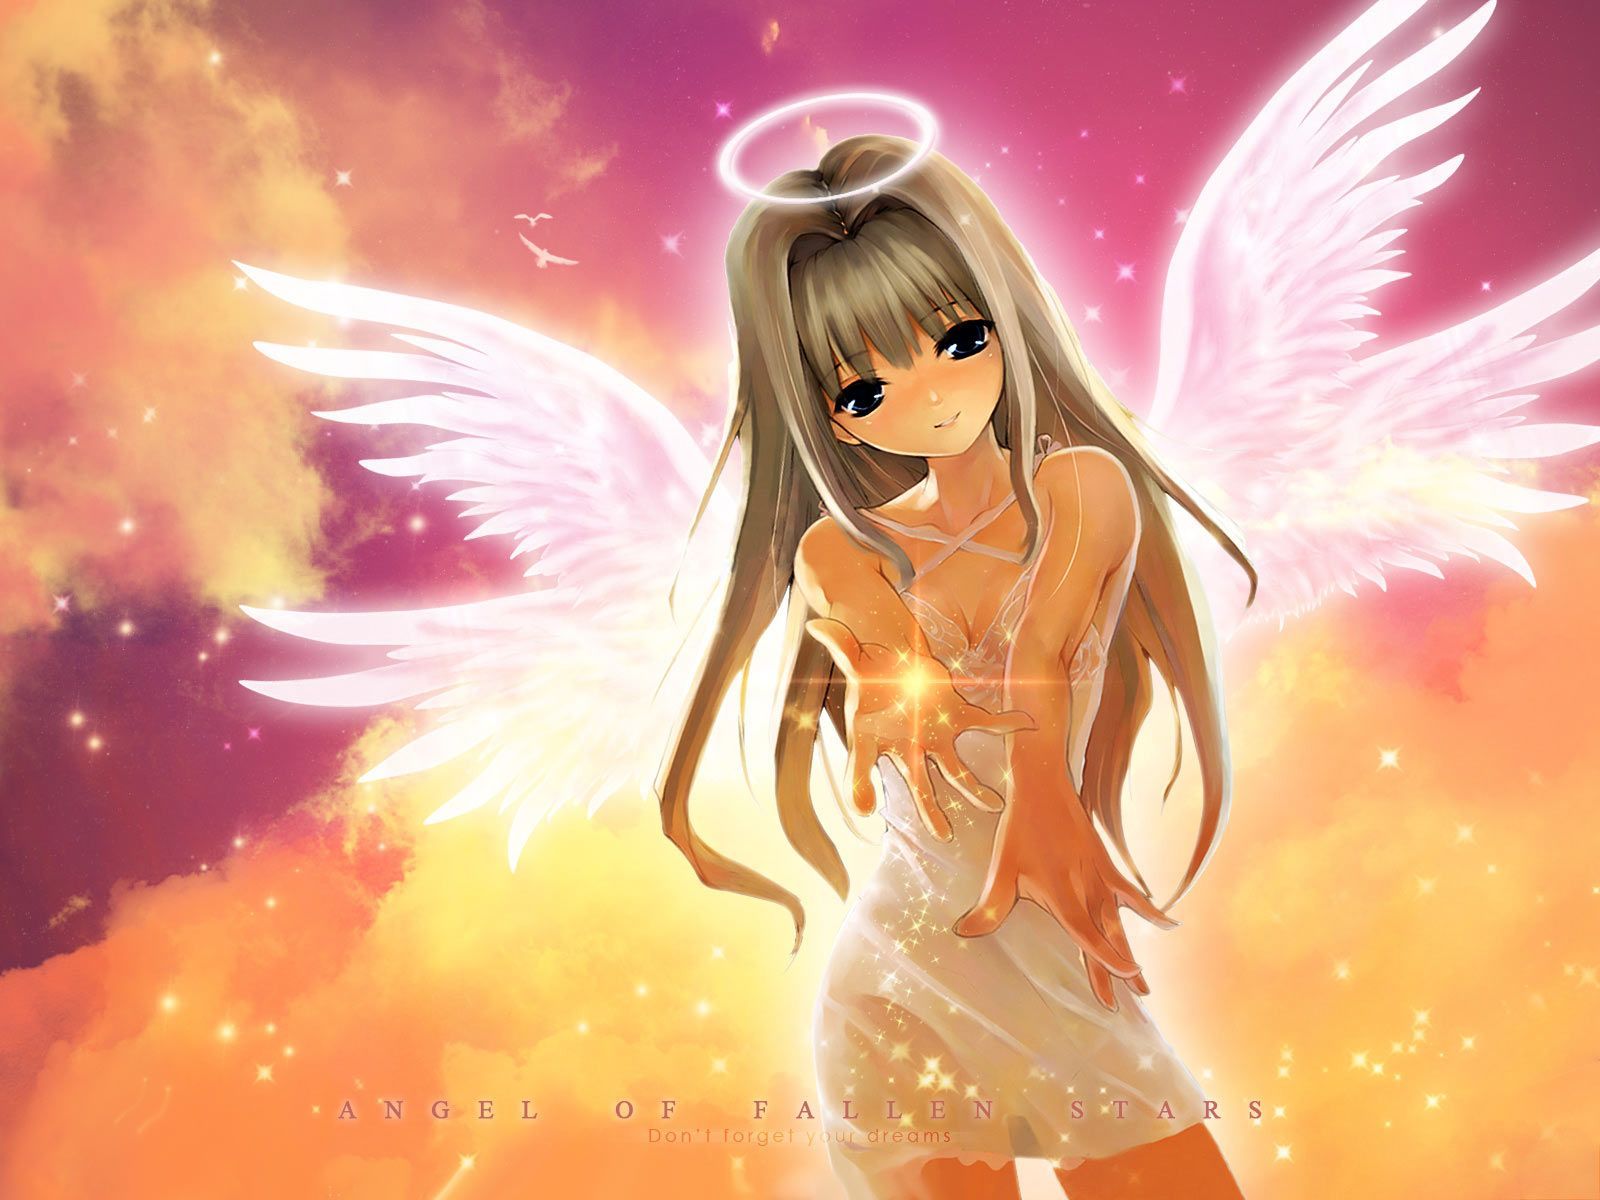 Anime characters wings angel male girl swords wallpaper | 1600x1200 |  798433 | WallpaperUP